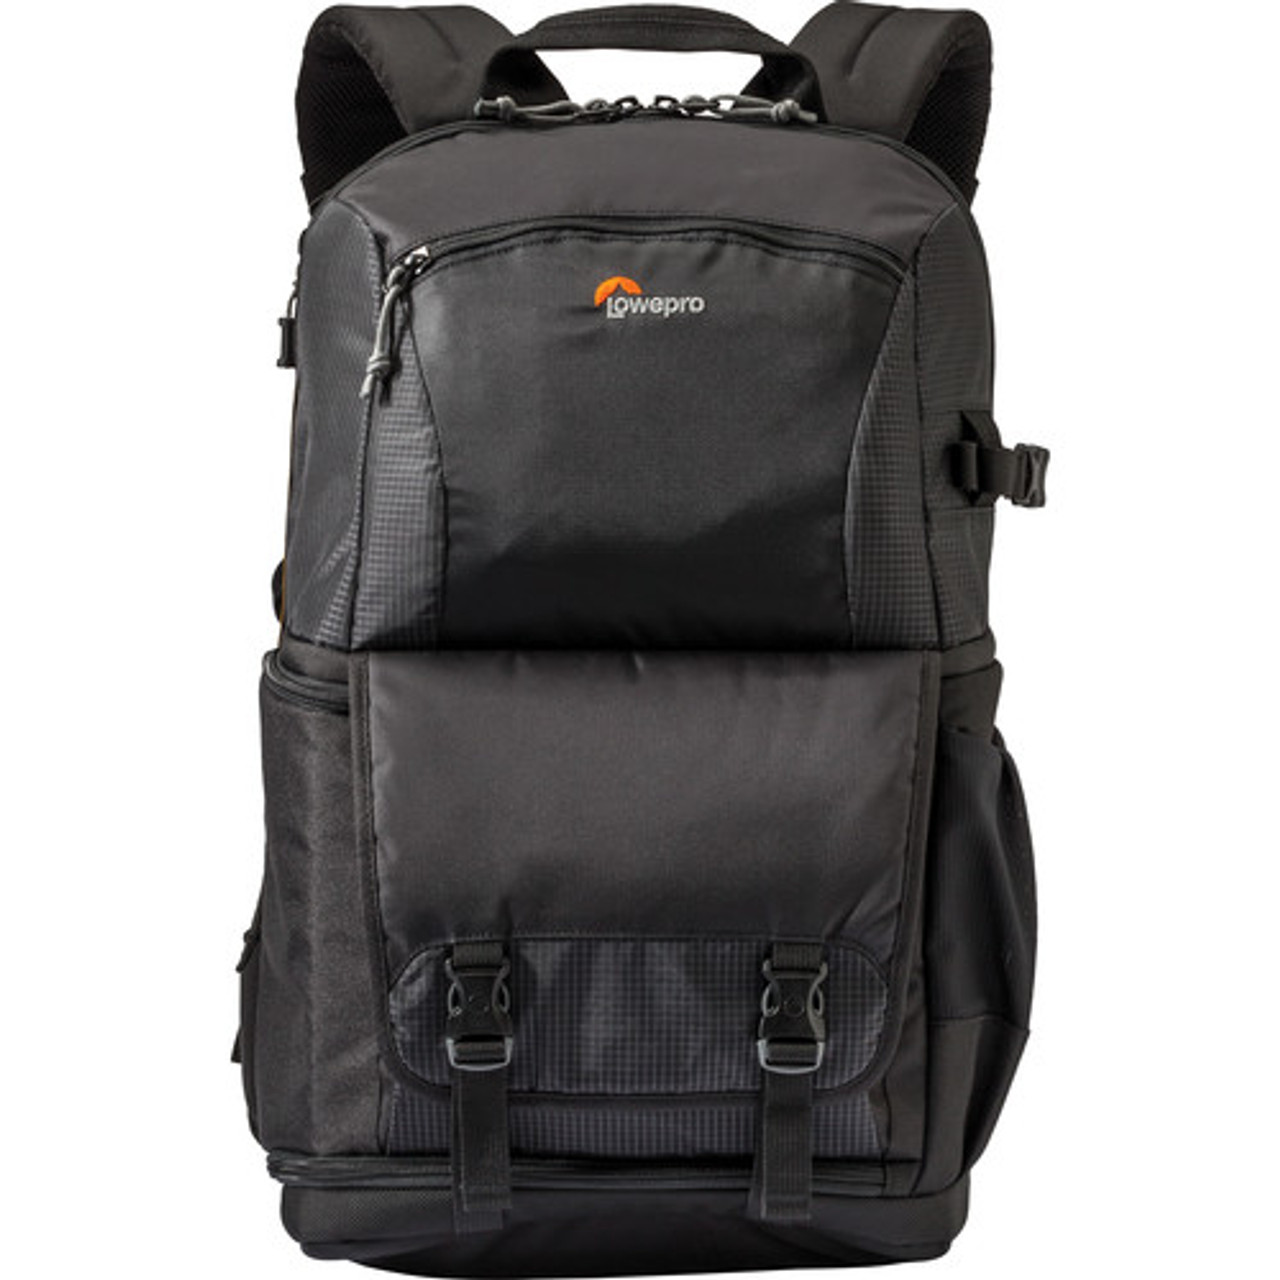 fastpack 250 aw